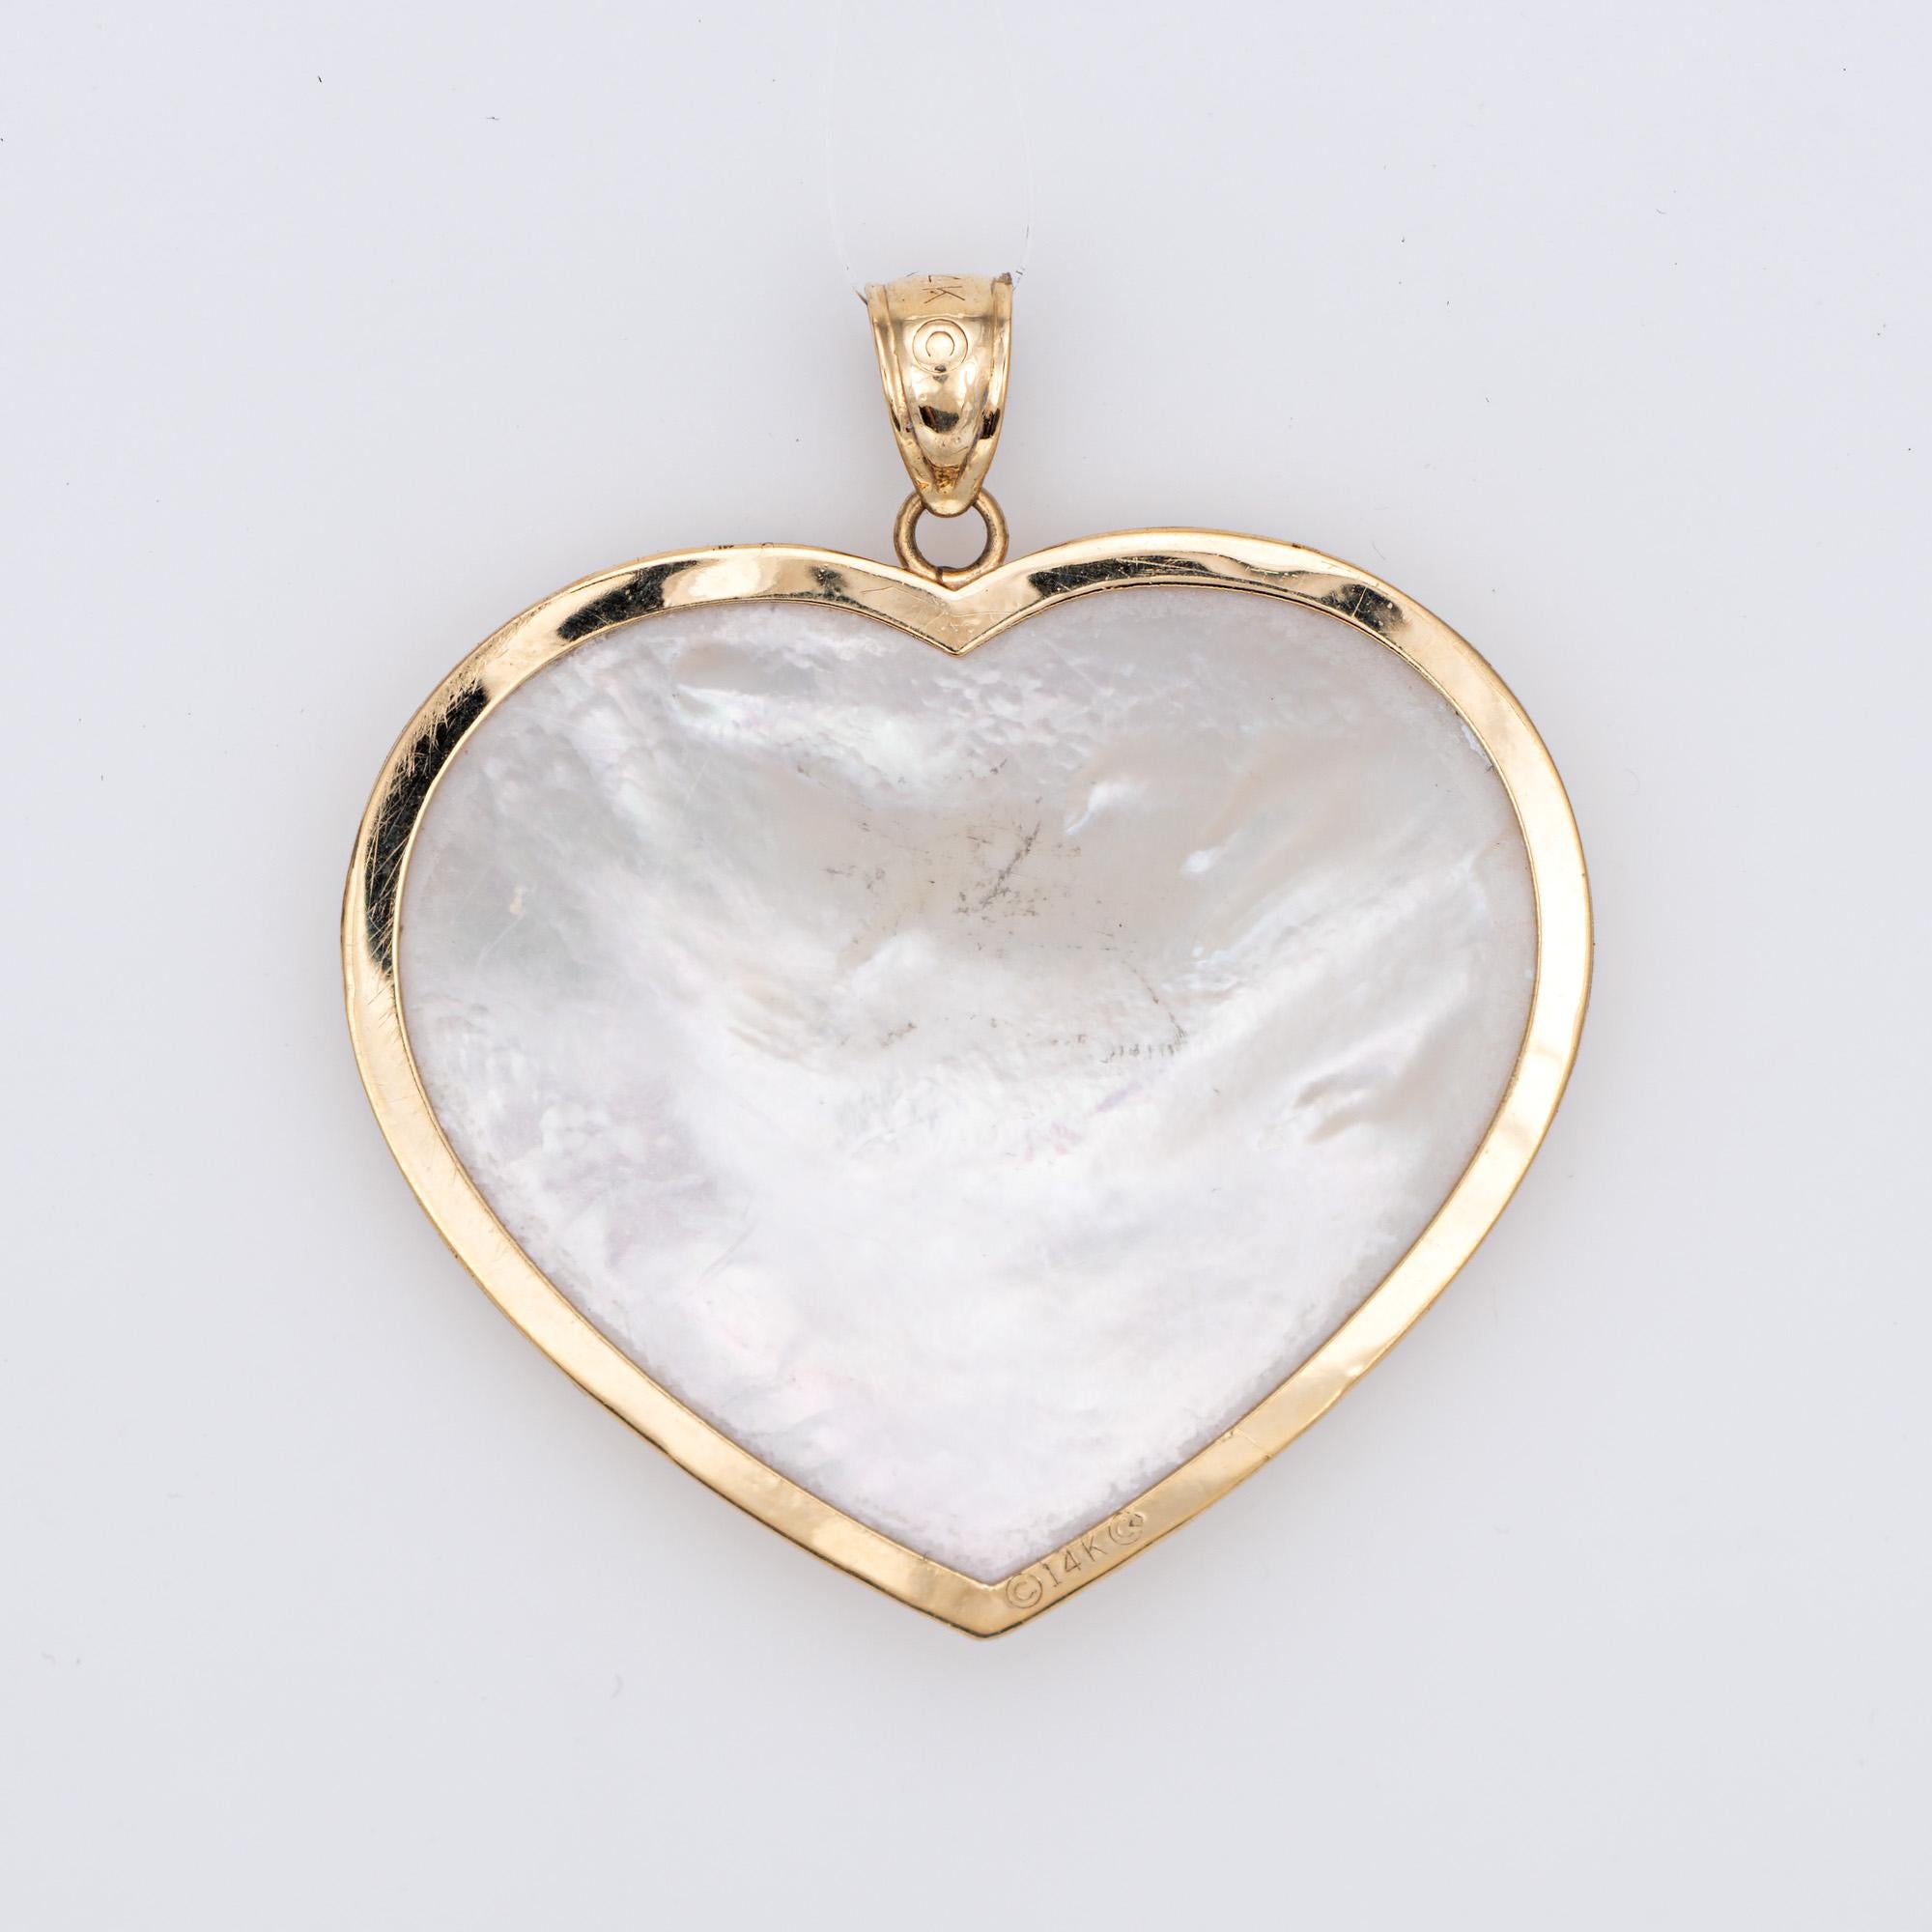 Finely detailed estate large heart pendant crafted in 14k yellow gold.

Mother of pearl measures 32mm x 28mm (in very good condition and free of cracks or chips).  

The distinct and beautifully detailed pendant features a scrolled design over